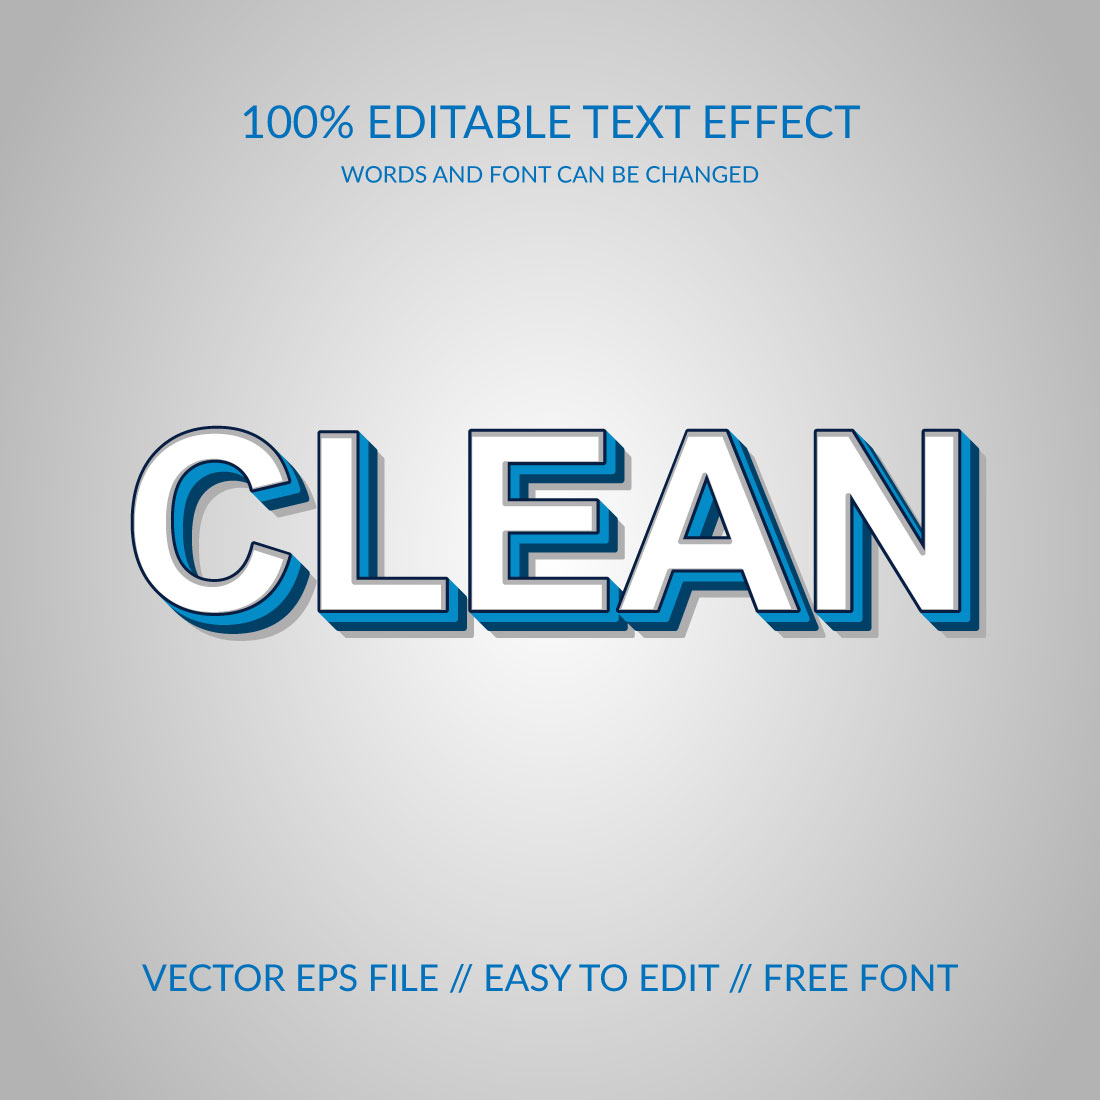 Clean 3d vector eps text effect cover image.